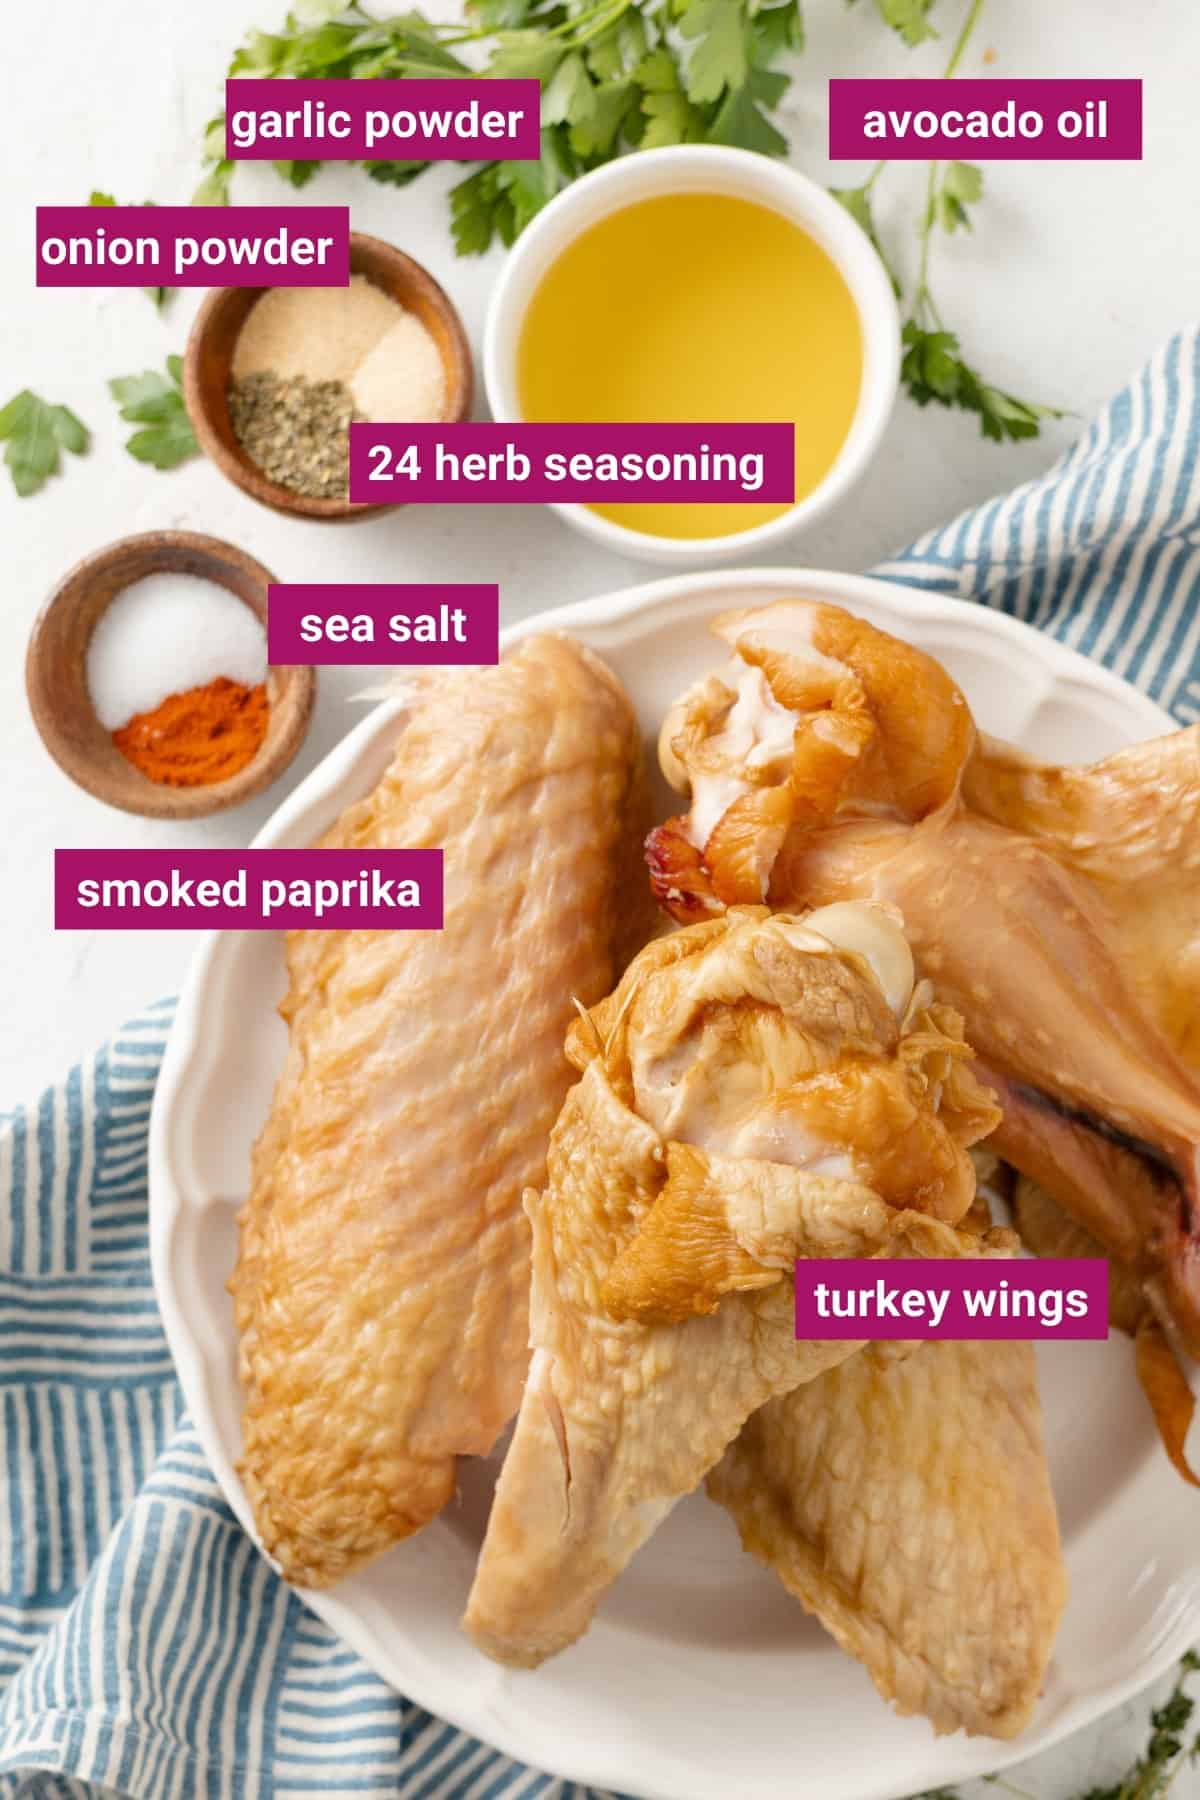 Overhead view of the labeled ingredients for air fryer turkey wings: a plate full of turkey wings, a bowl of sea salt and smoked paprika, a bowl of onion powder, garlic powder, and 24 herb seasoning, and a bowl of avocado oil